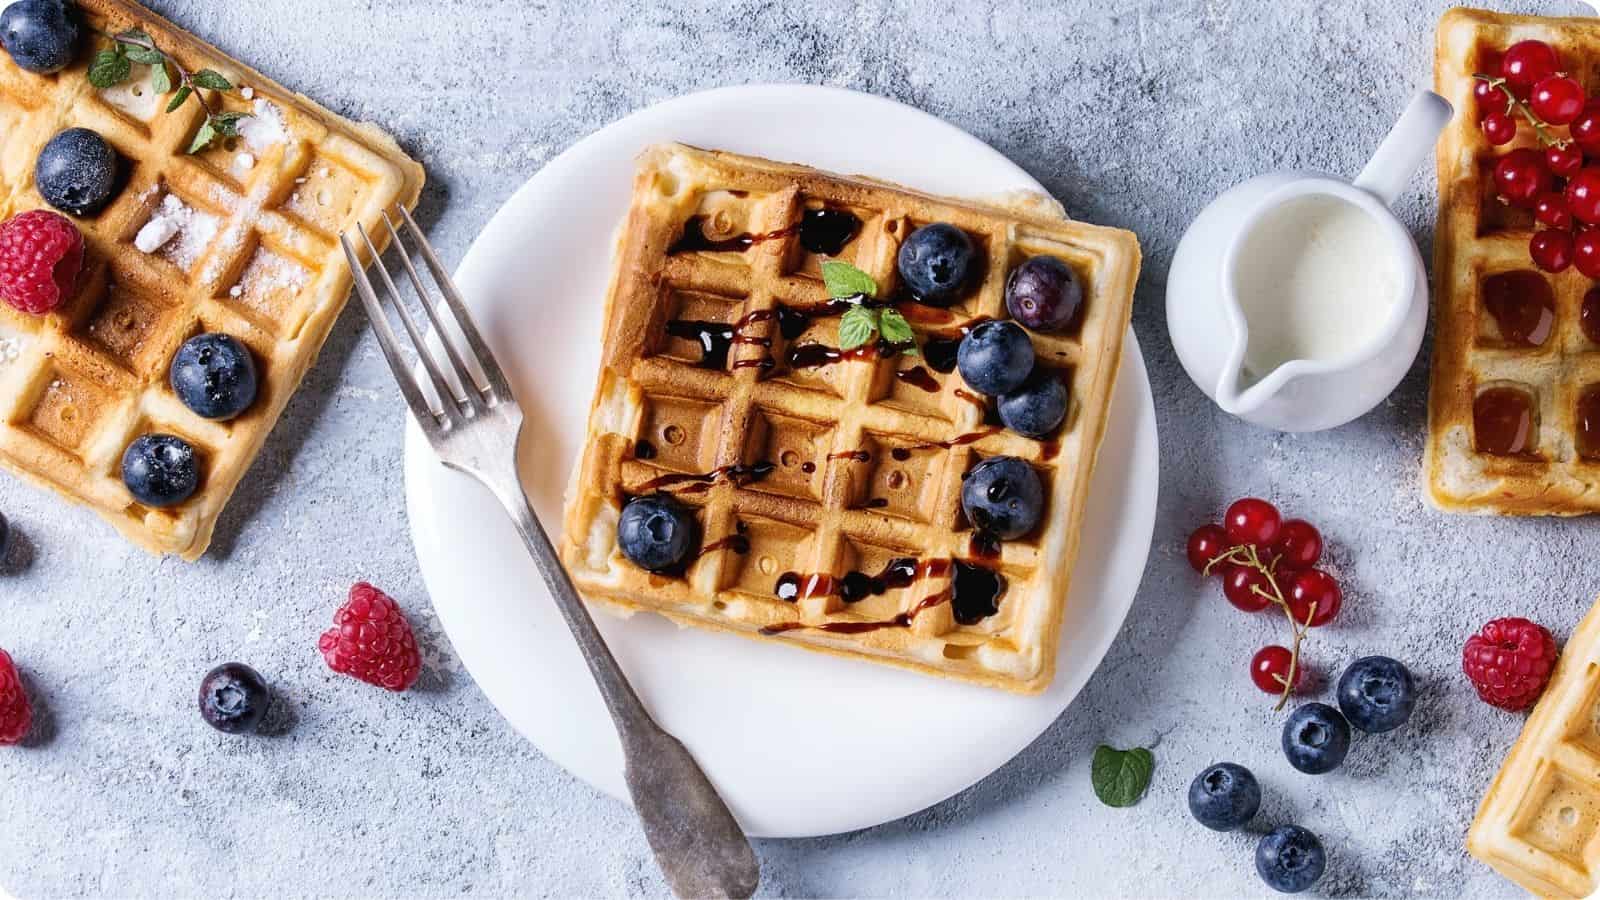 Waffles adorned with blueberries, raspberries, and cherries, drizzled with chocolate syrup and dusted with powdered sugar from a small dispenser, served on a table.⁣
⁣⁣